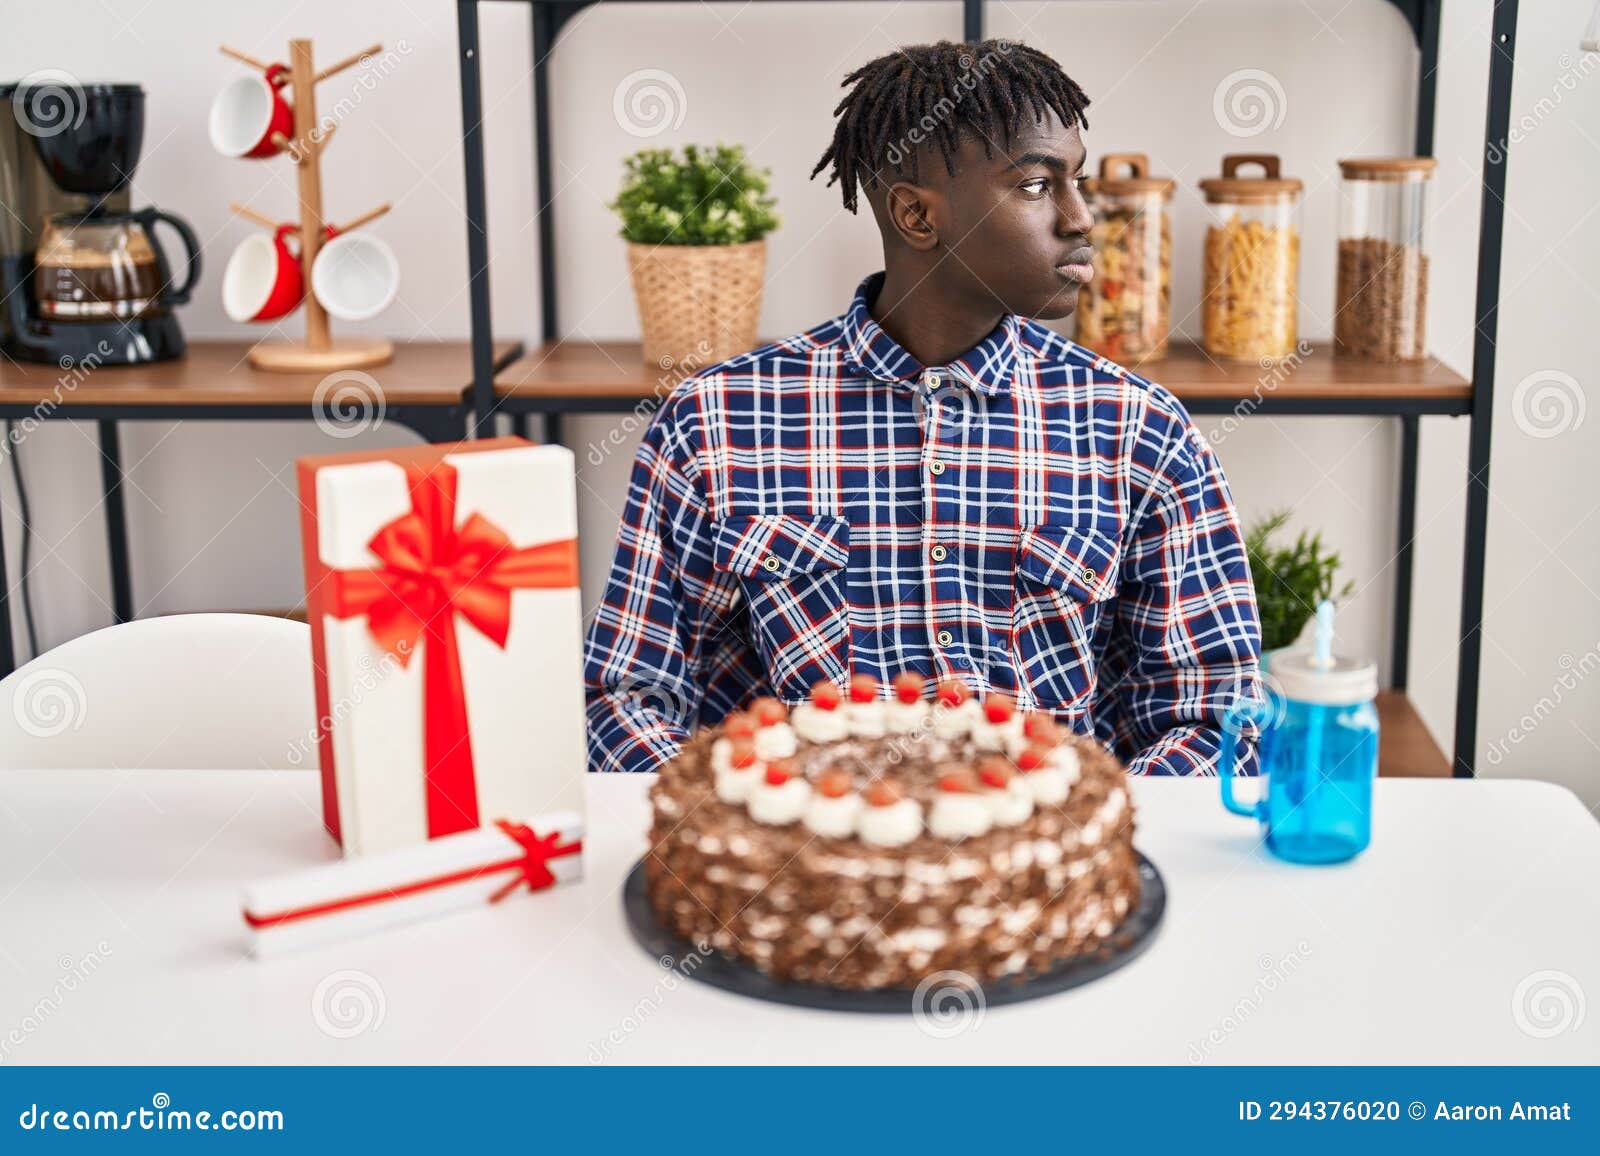 African Man with Dreadlocks Celebrating Birthday Holding Big Chocolate Cake  Looking To Side, Relax Profile Pose with Natural Face Stock Photo - Image  of celebration, funny: 294376020